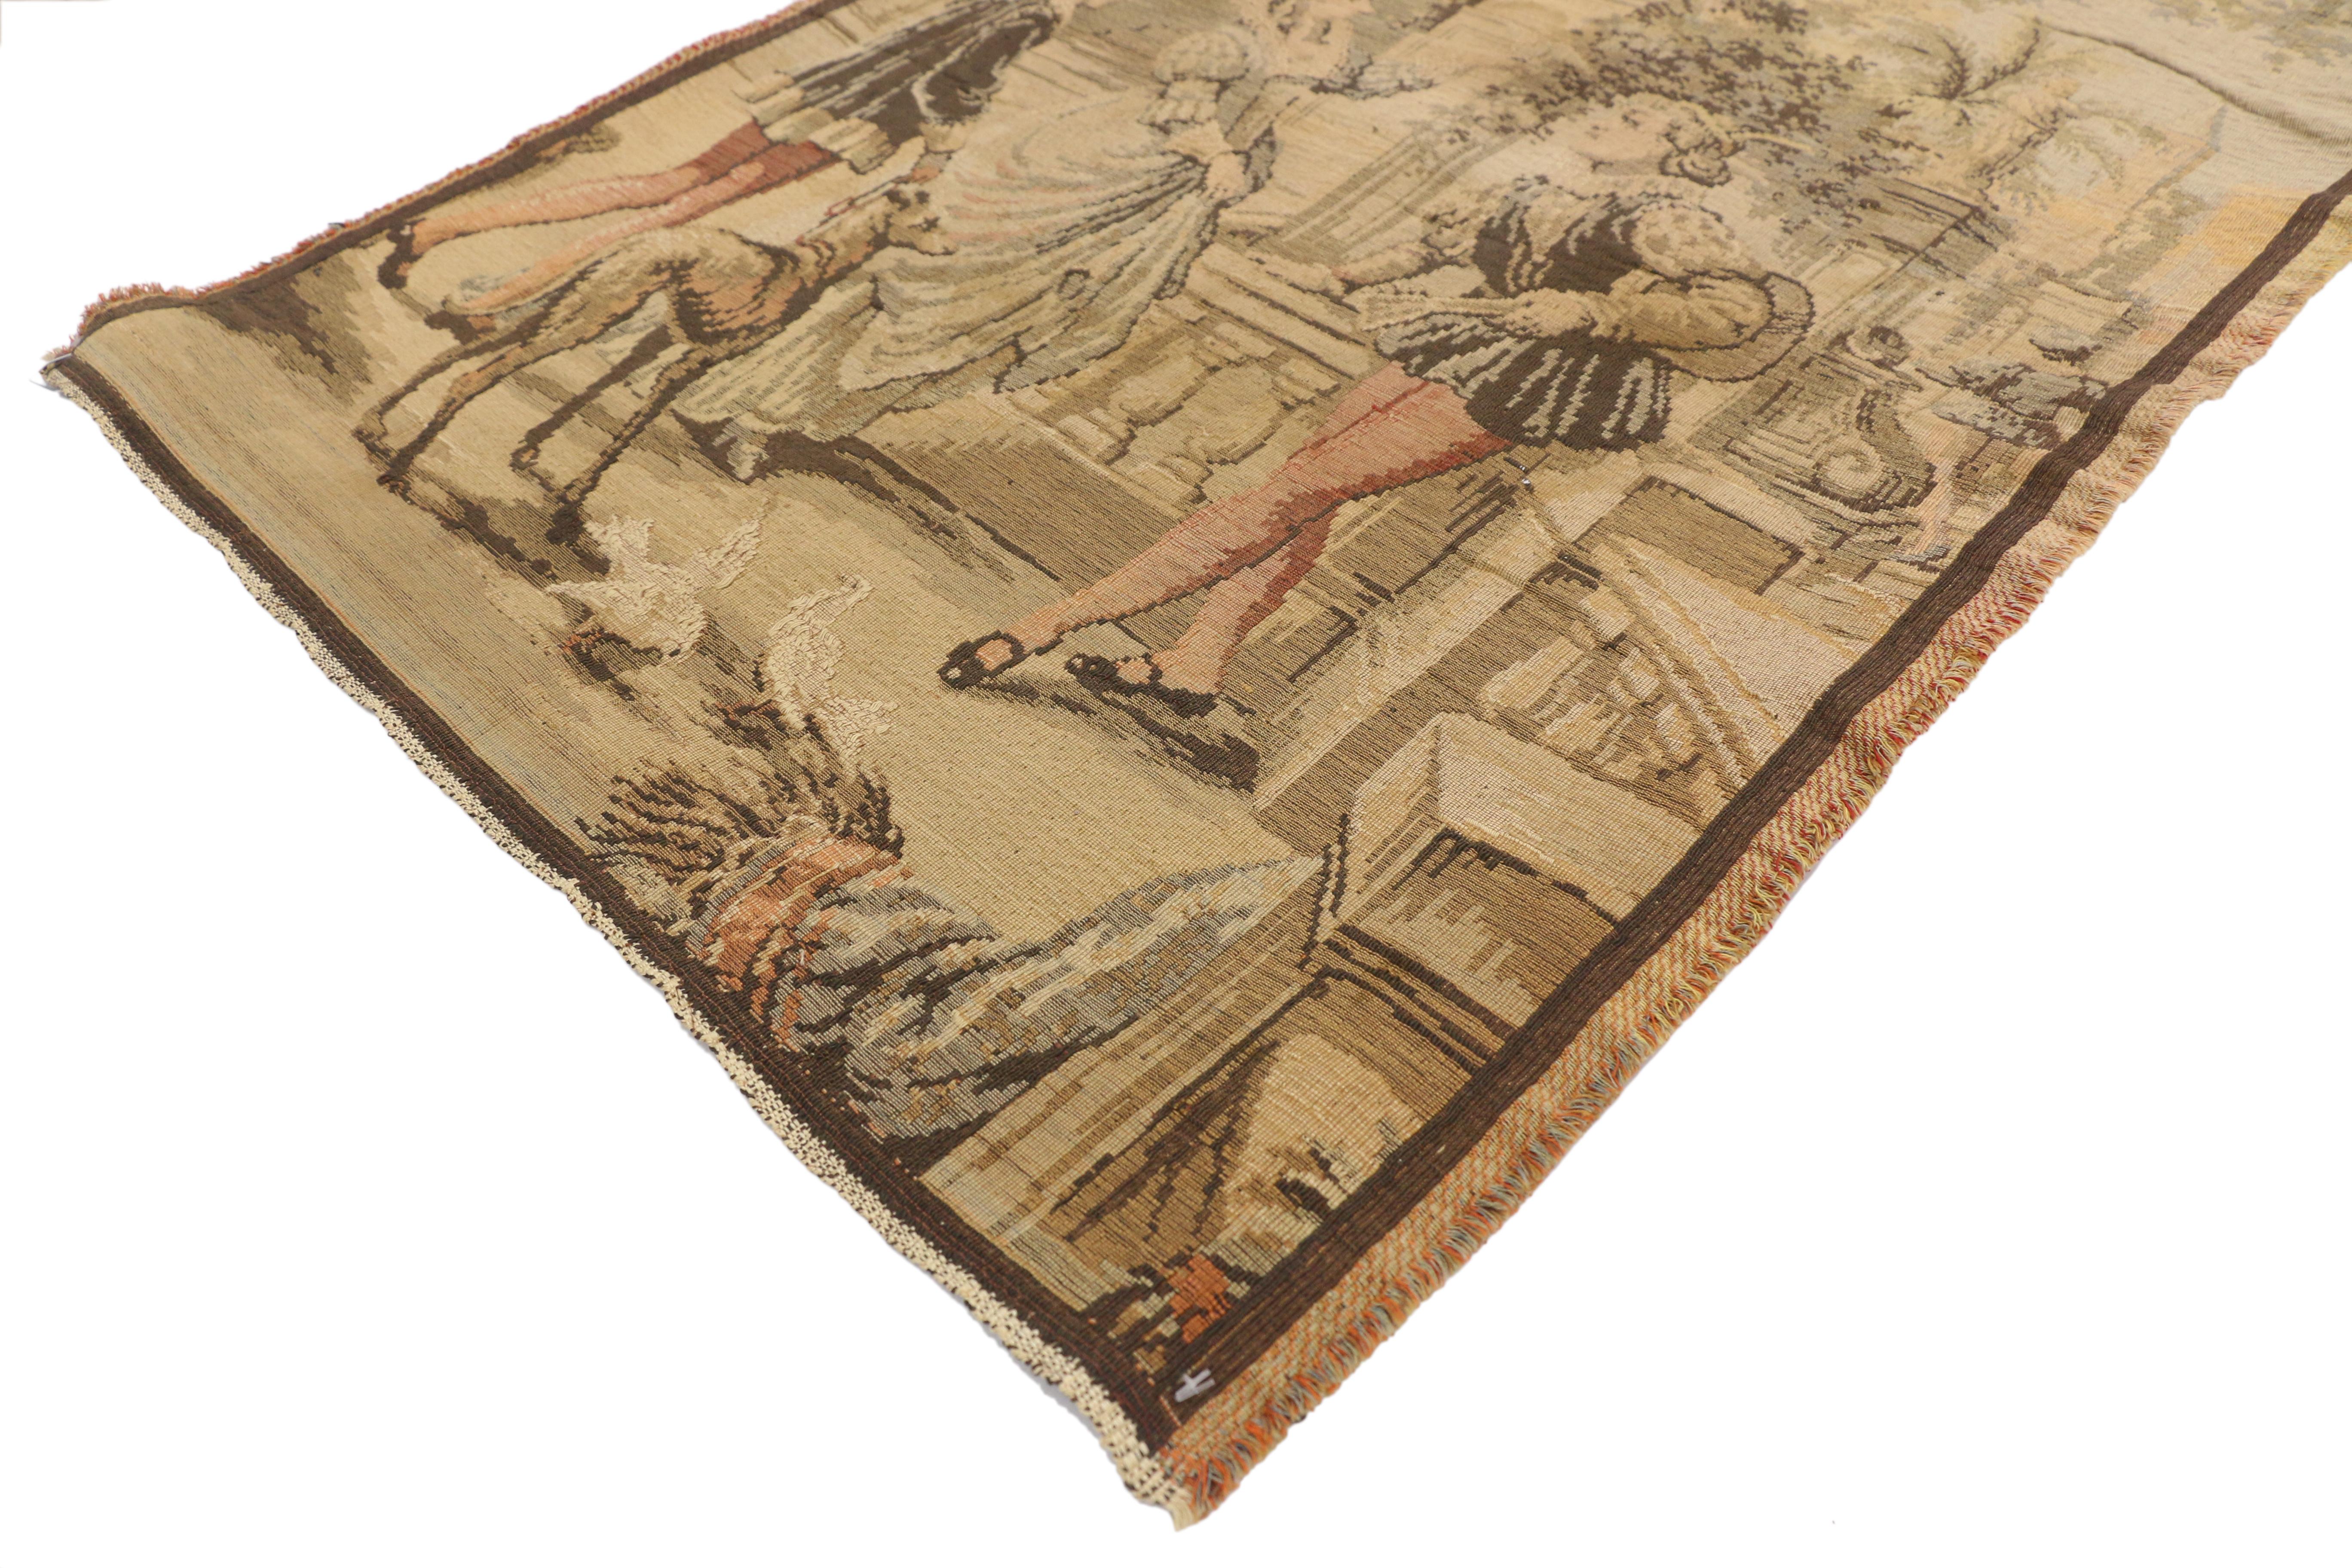 74926 Vintage Belgian Venetian Tapestry with Venice Renaissance Canal Scene and Victorian Rococo Style 02'03 x 03'02. Drawing inspiration from a combination of Giacomo Mantegazza figure painting style and Canaletto, this vintage Belgian Venetian